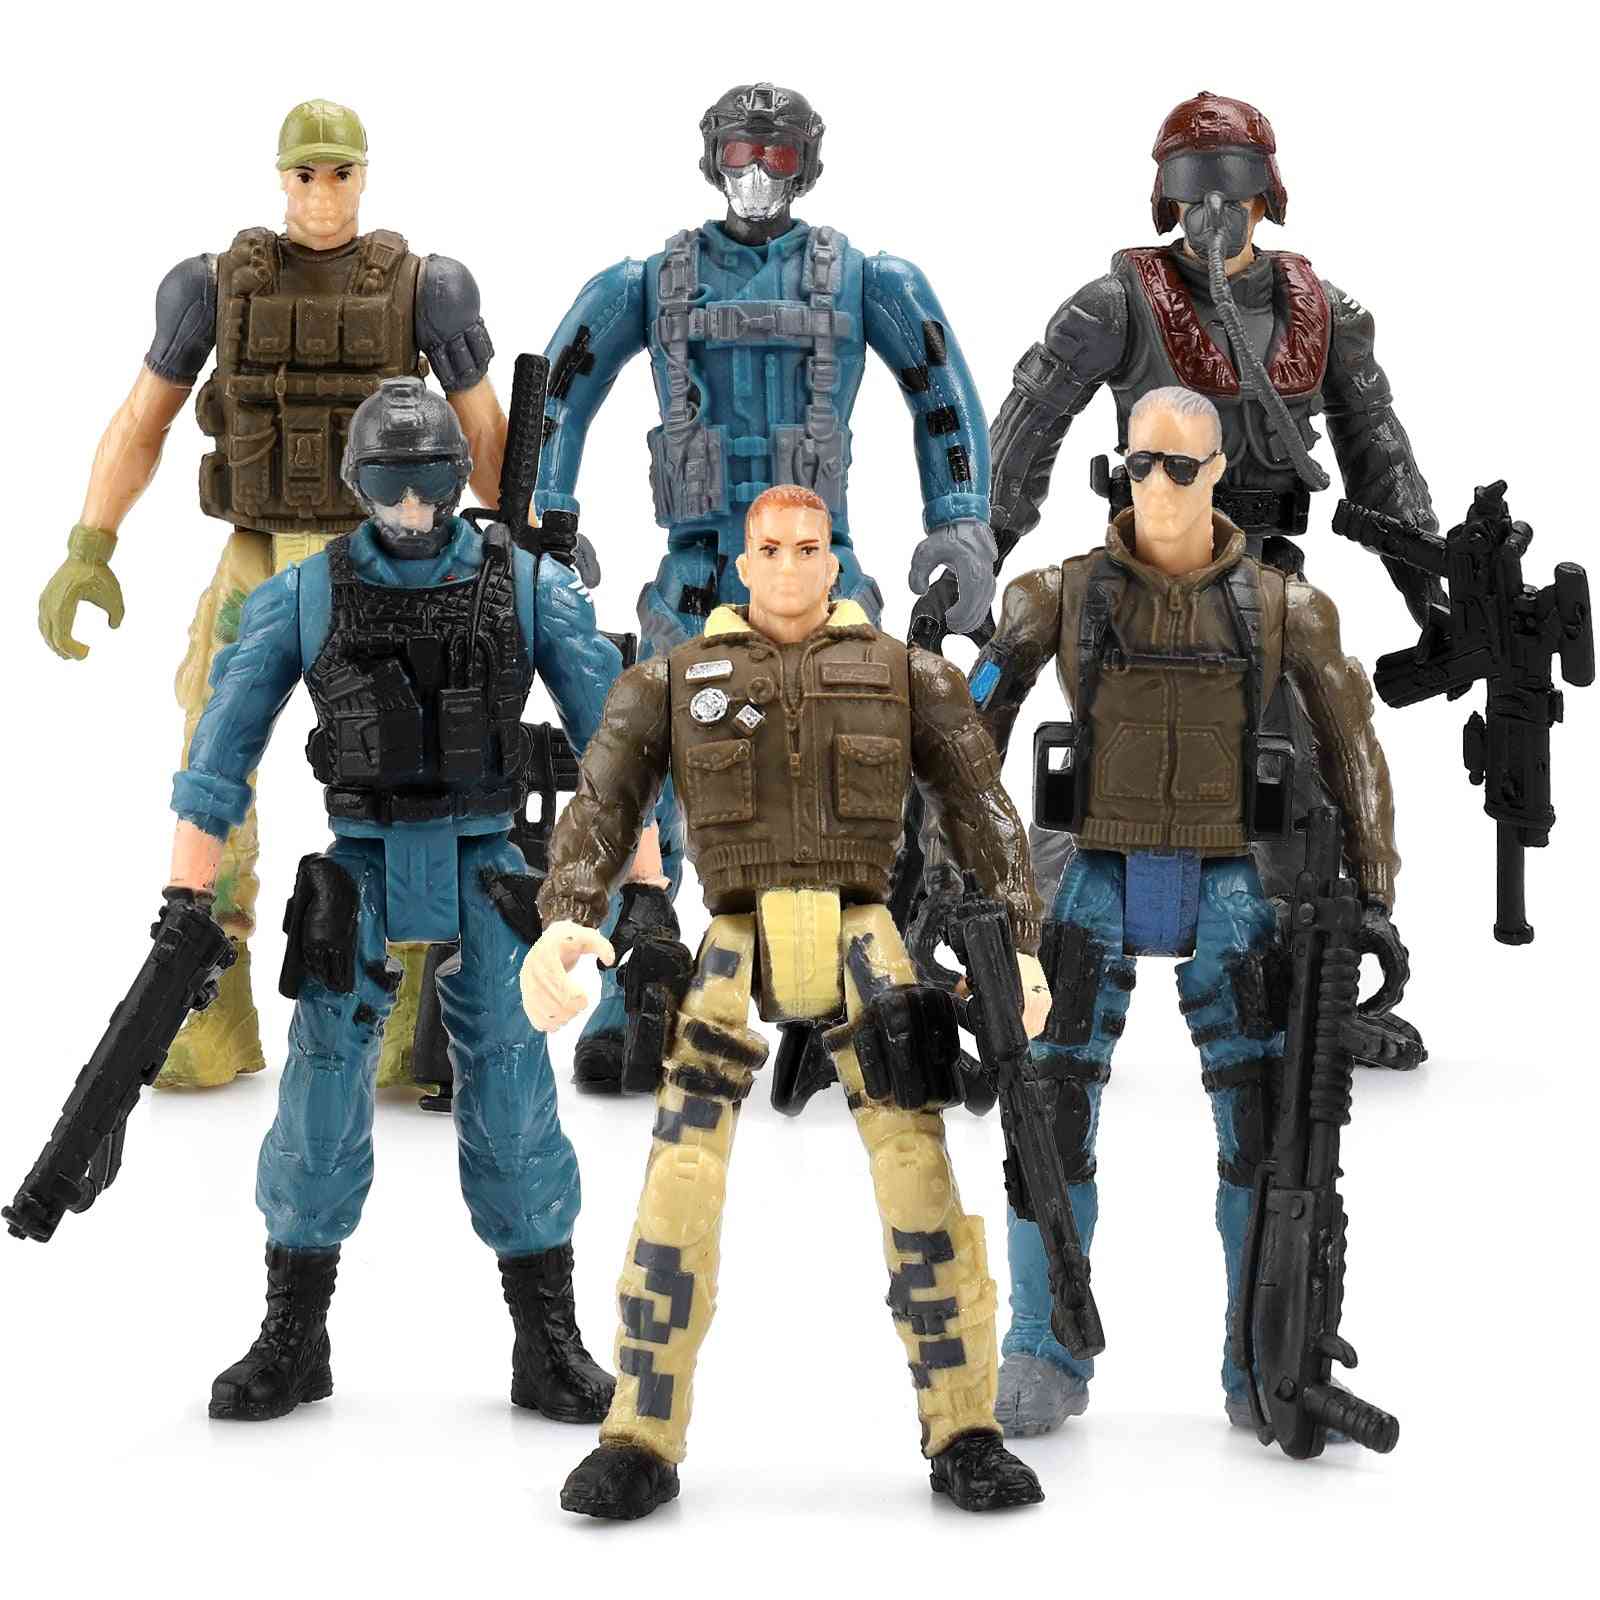 Army Men And Swat Team Toy, Soldiers Action Figures, Playset With Joint Movable Figure Toys For Kids,